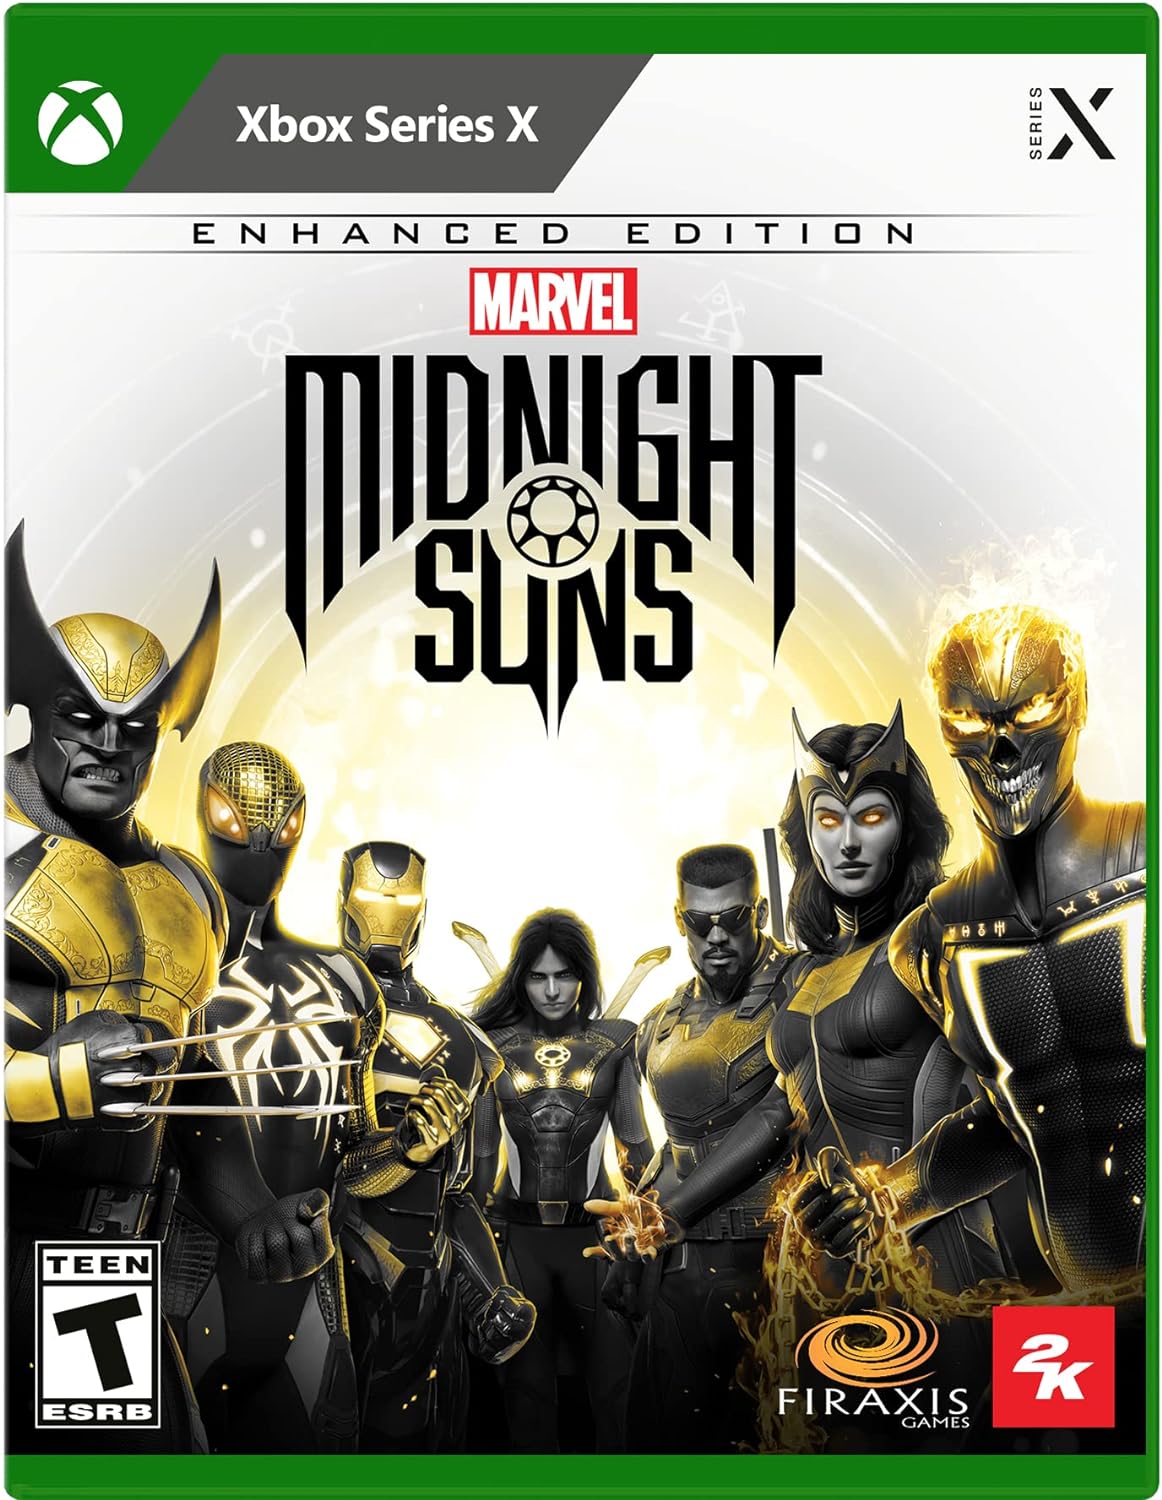 Get Marvel's Midnight Suns with GeForce RTX 30 Series